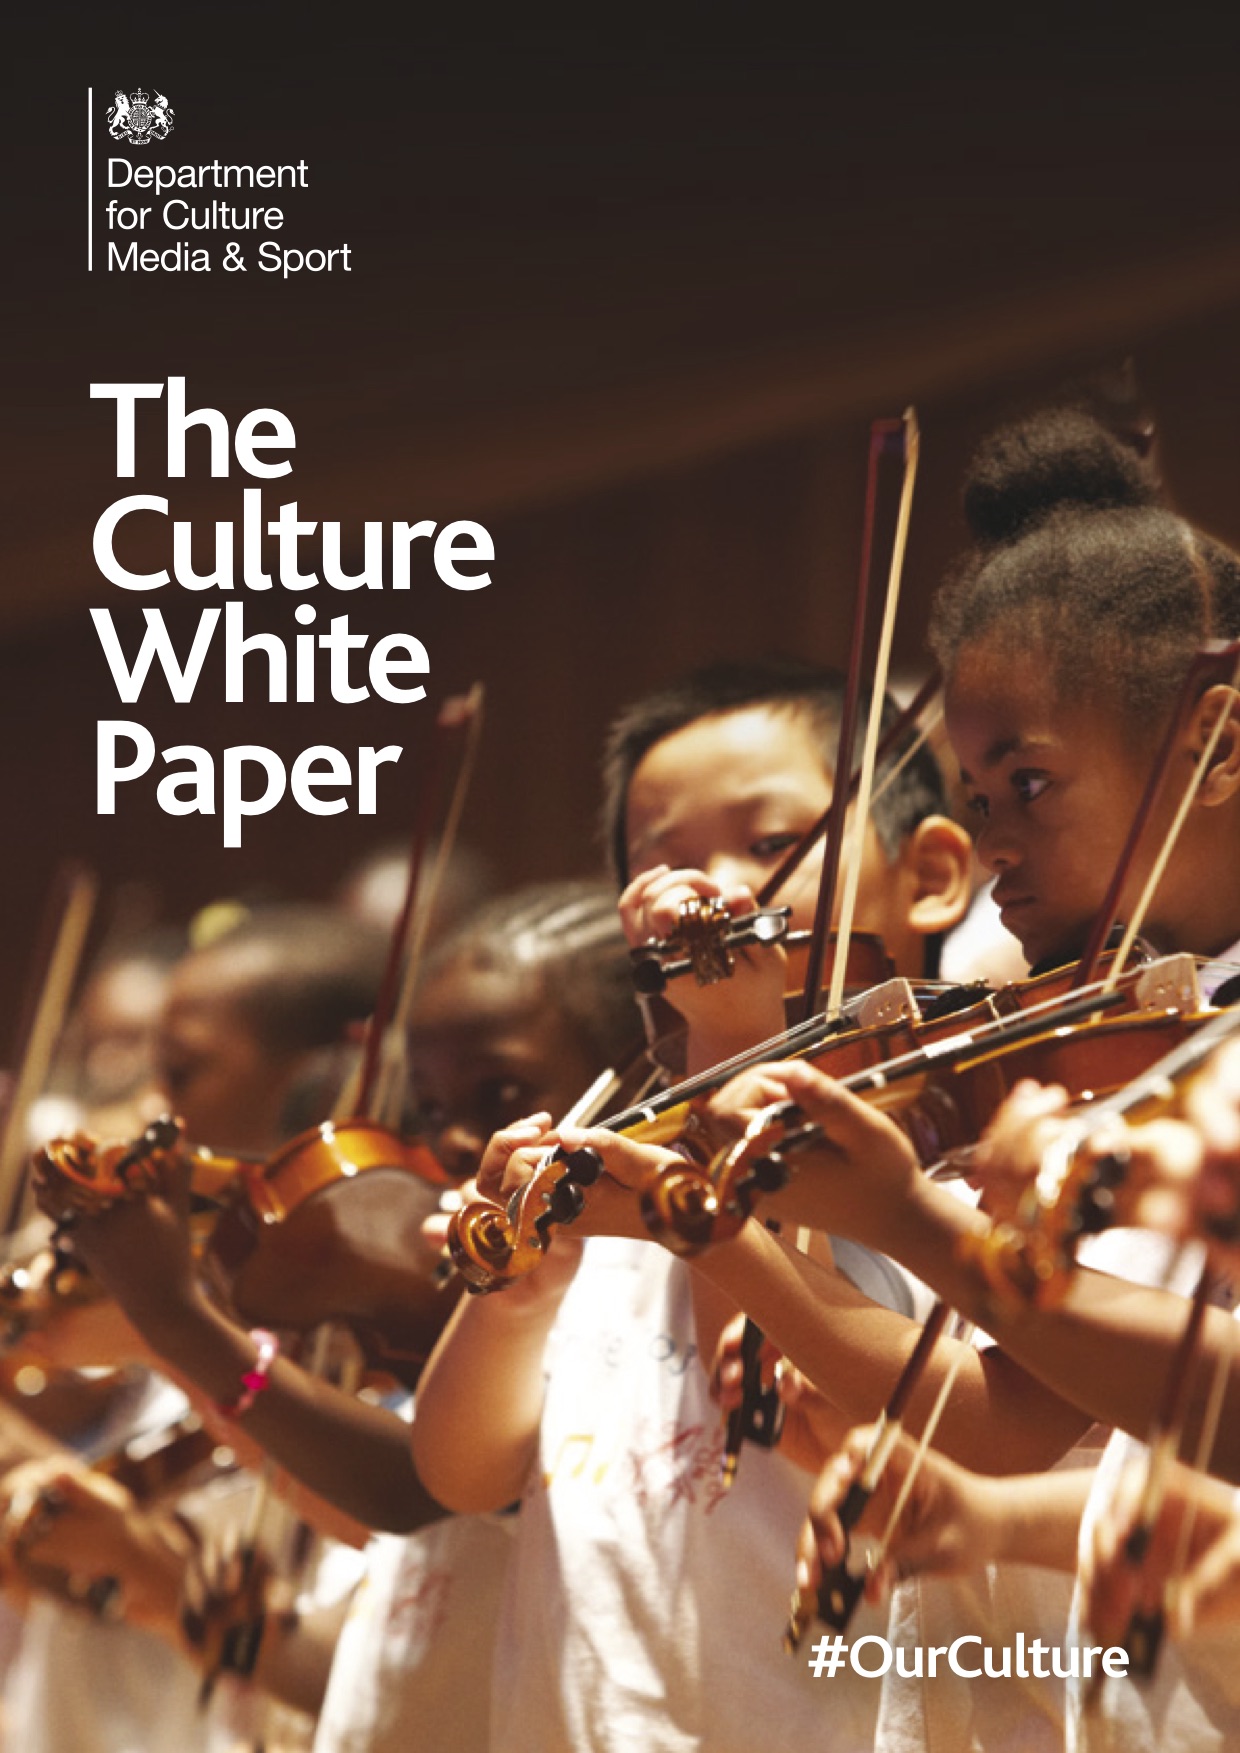 "The Culture White Paper: #OurCulture" a report from the Government Department for Culture, Media and Sport. Cover art is a group of ethnically diverse children learning to play violin in school uniforms.